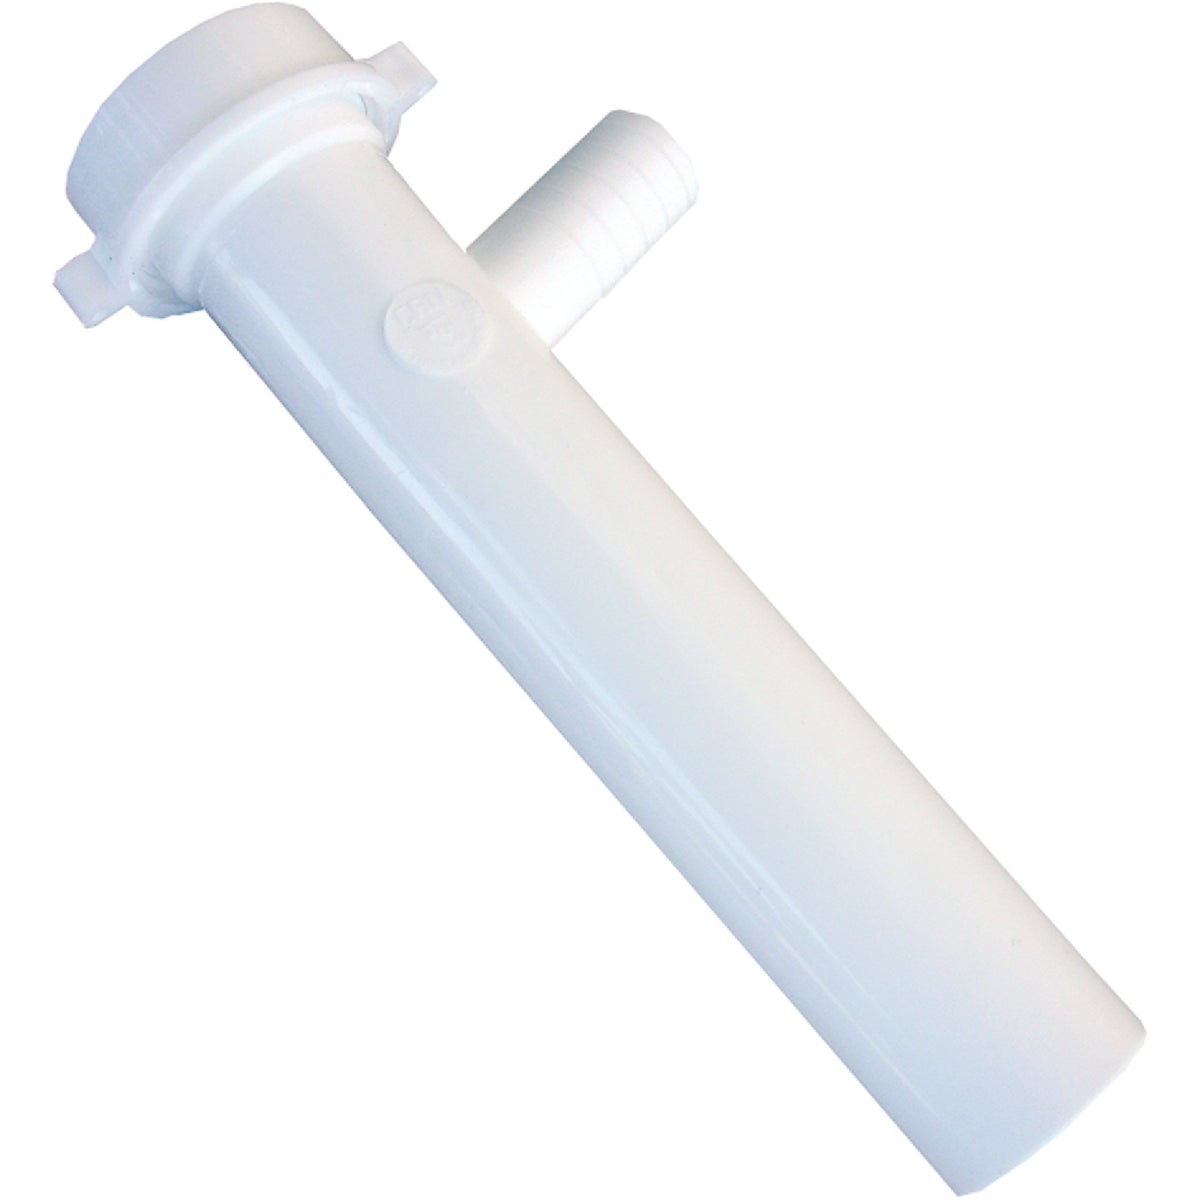 Lasco 1-1/2 In. x 8 In. White Slip Joint Dishwasher Tailpiece